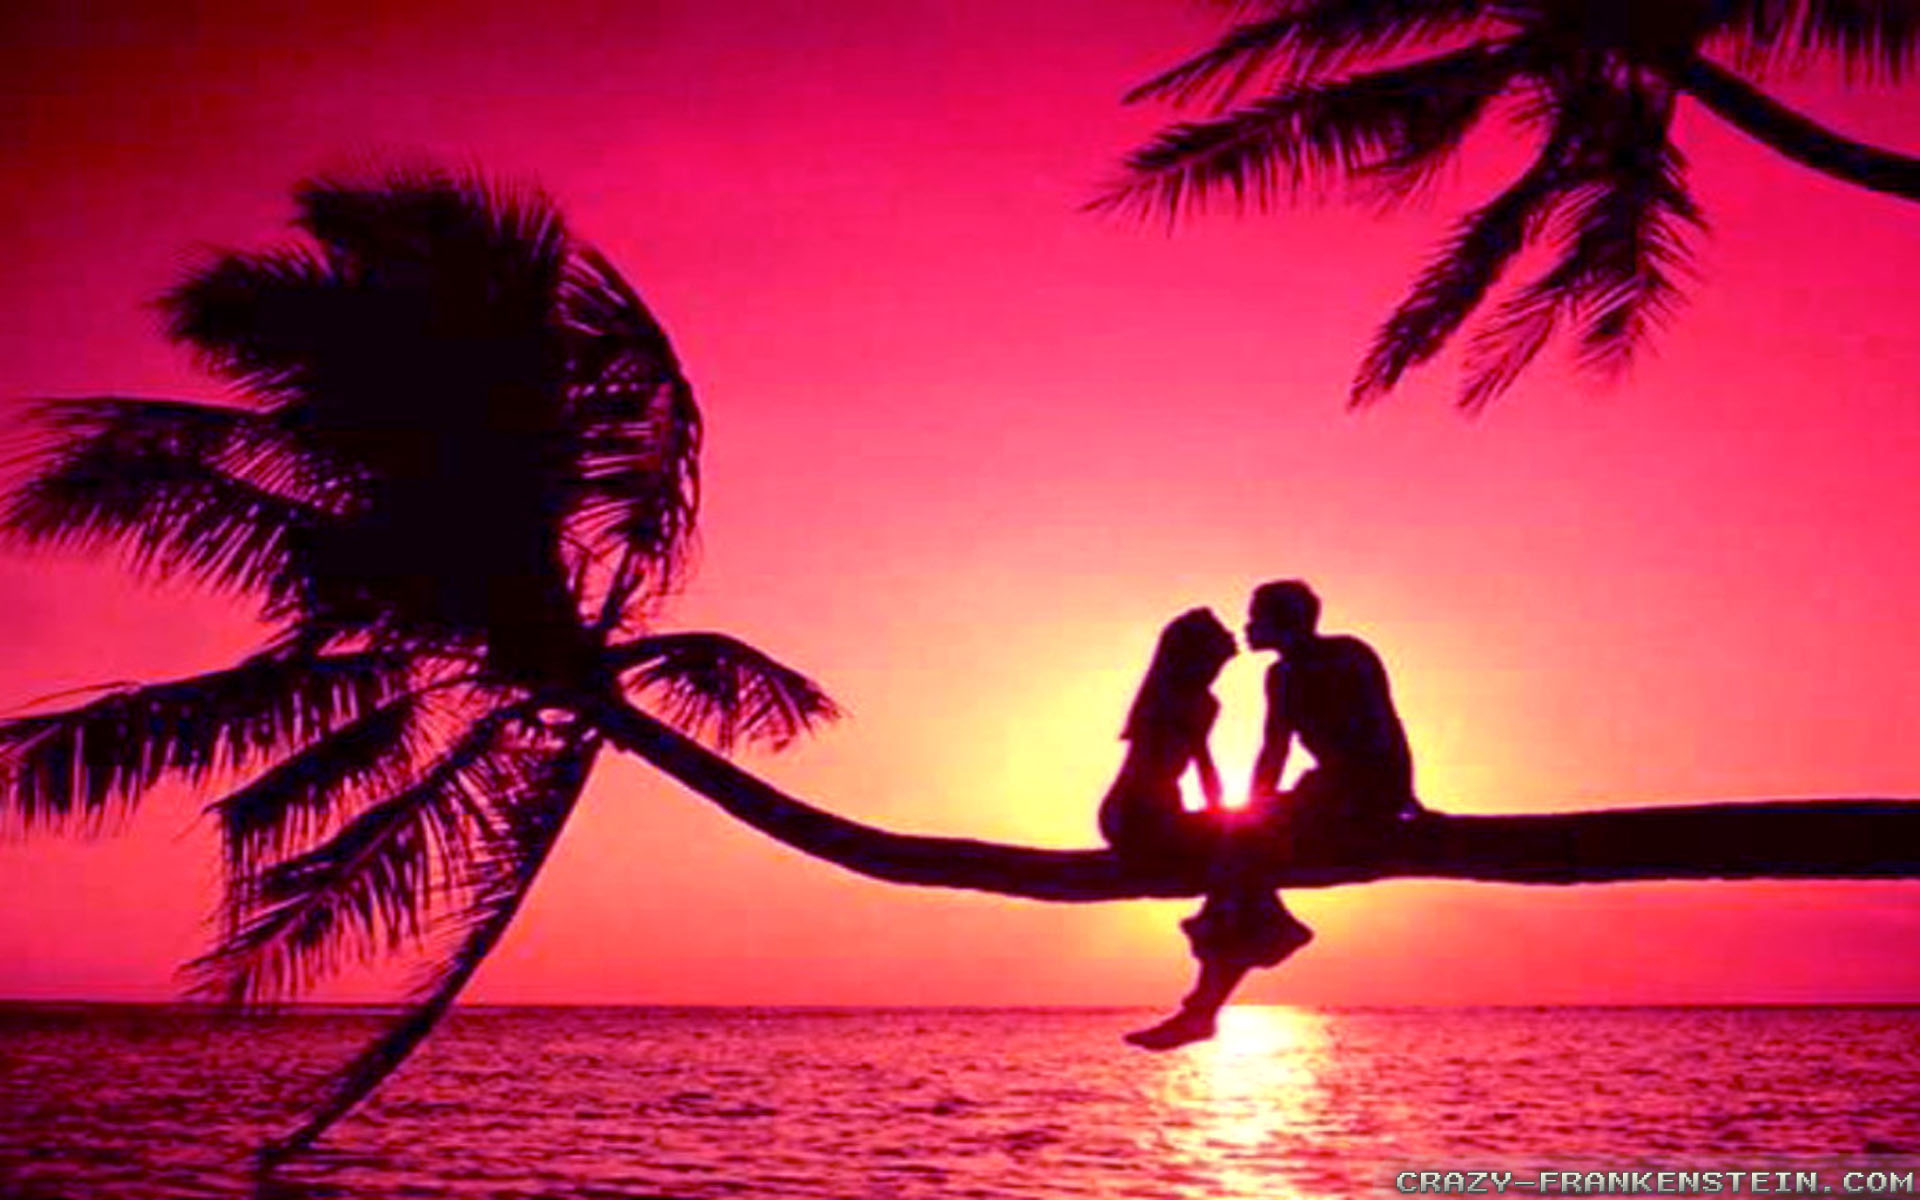  wallpapers of love couples in romance or romantic love wallpapers